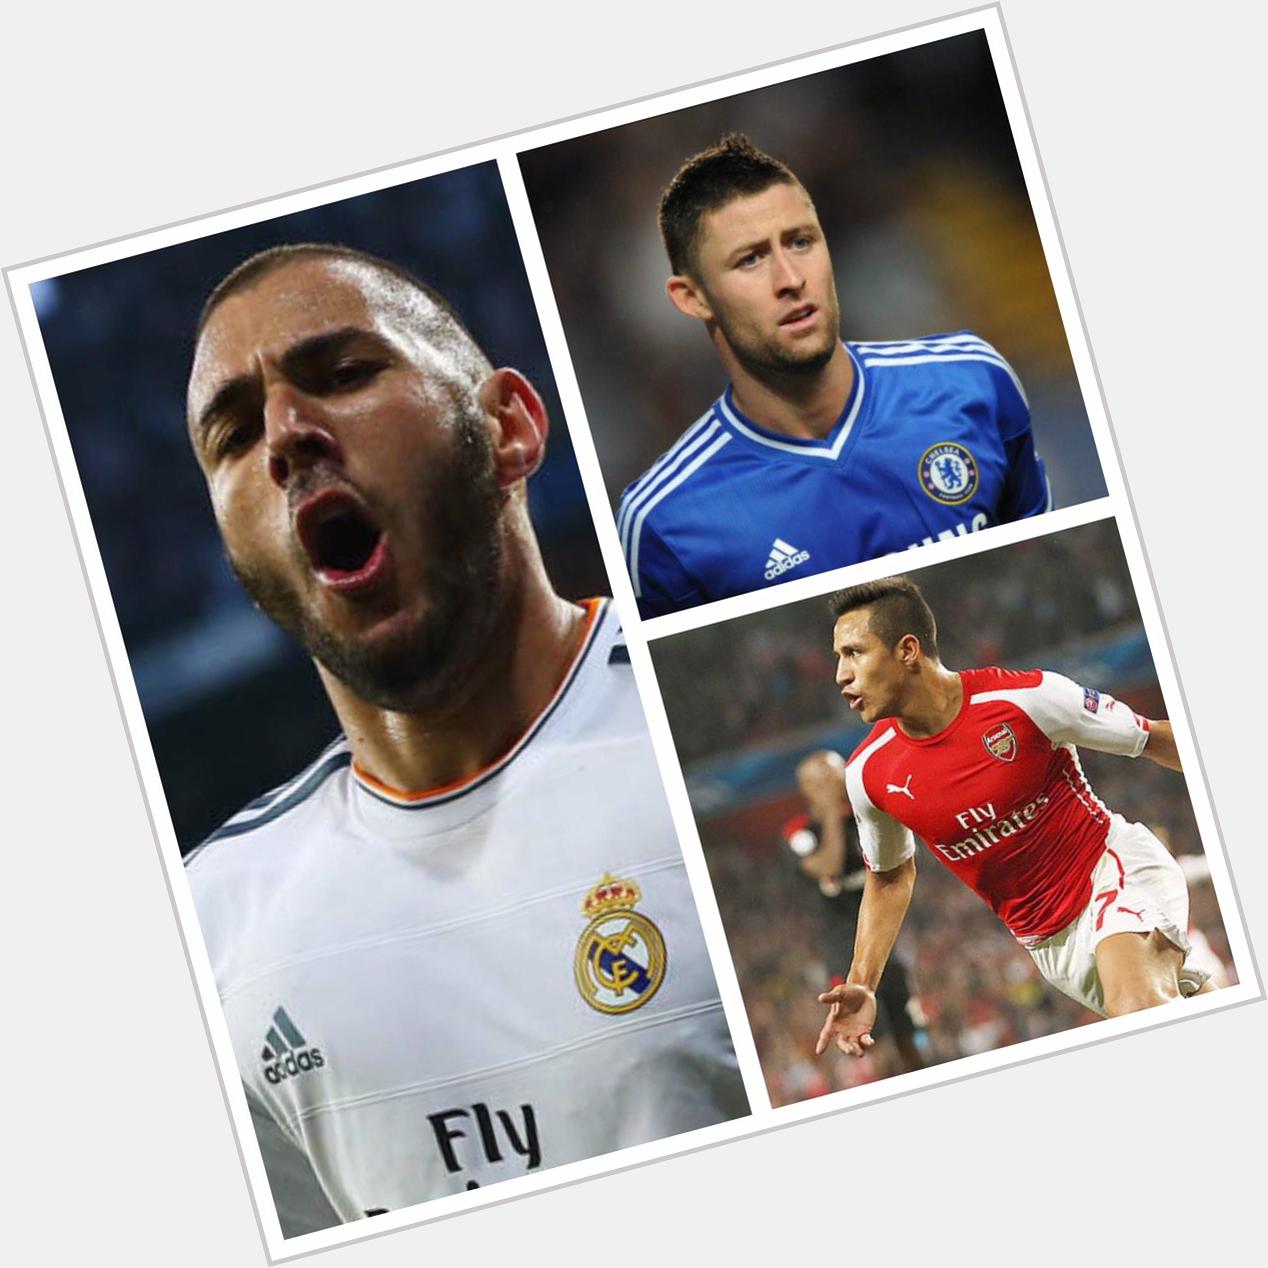 HAPPY BIRTHDAY! To Arsenals Alexis Sanchez, Real Madrids Karim Benzema and Chelseas Gary Cahill! 